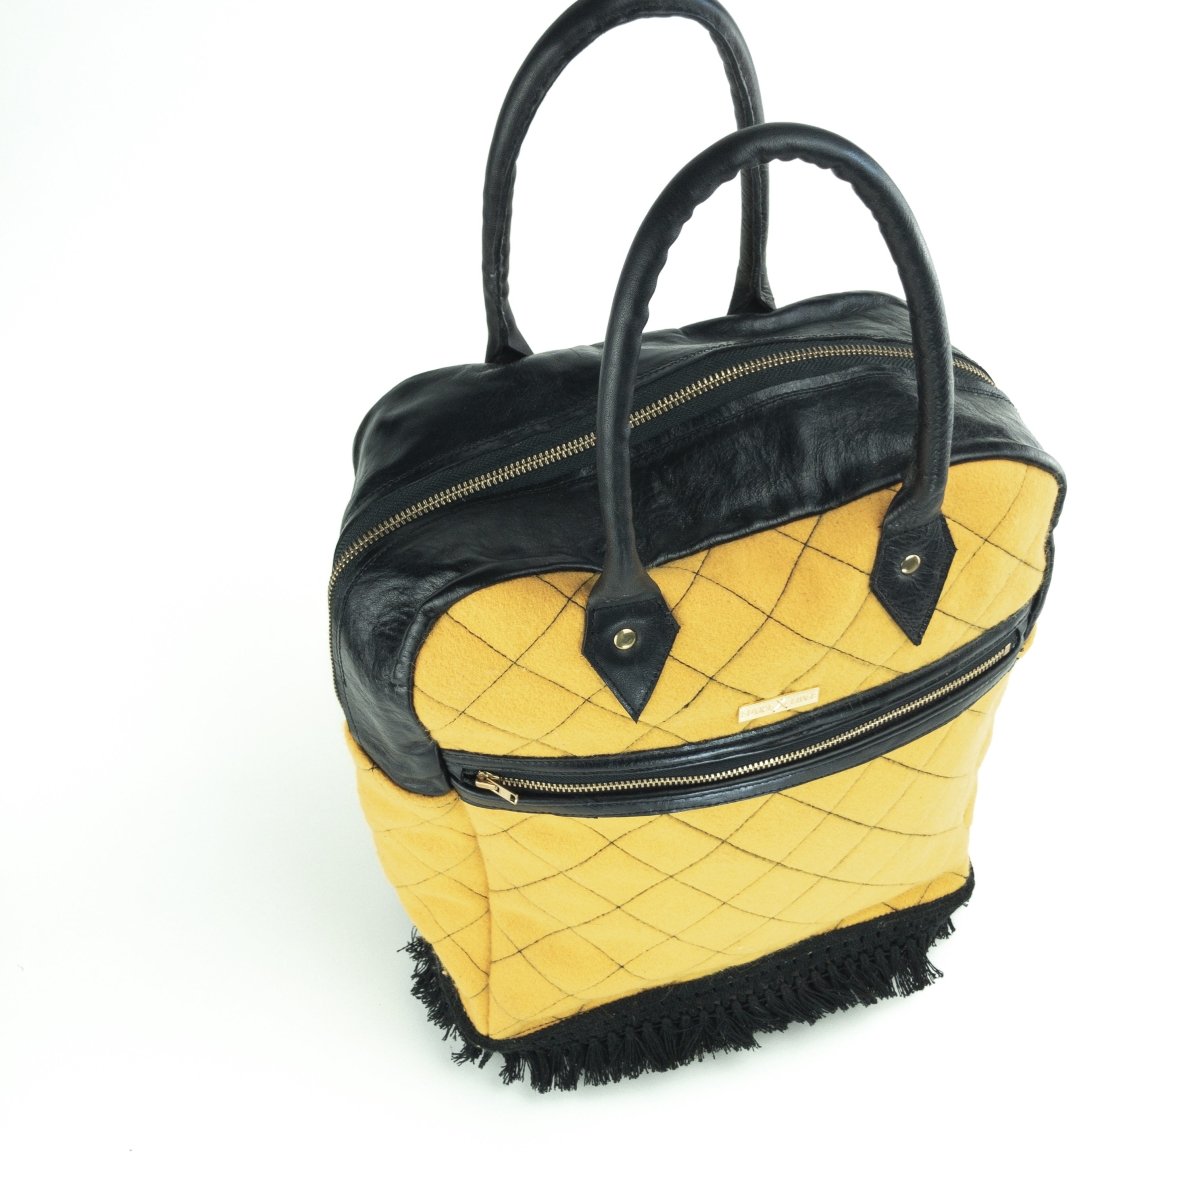 Quilted Wool Day Bag - Hart & Hive